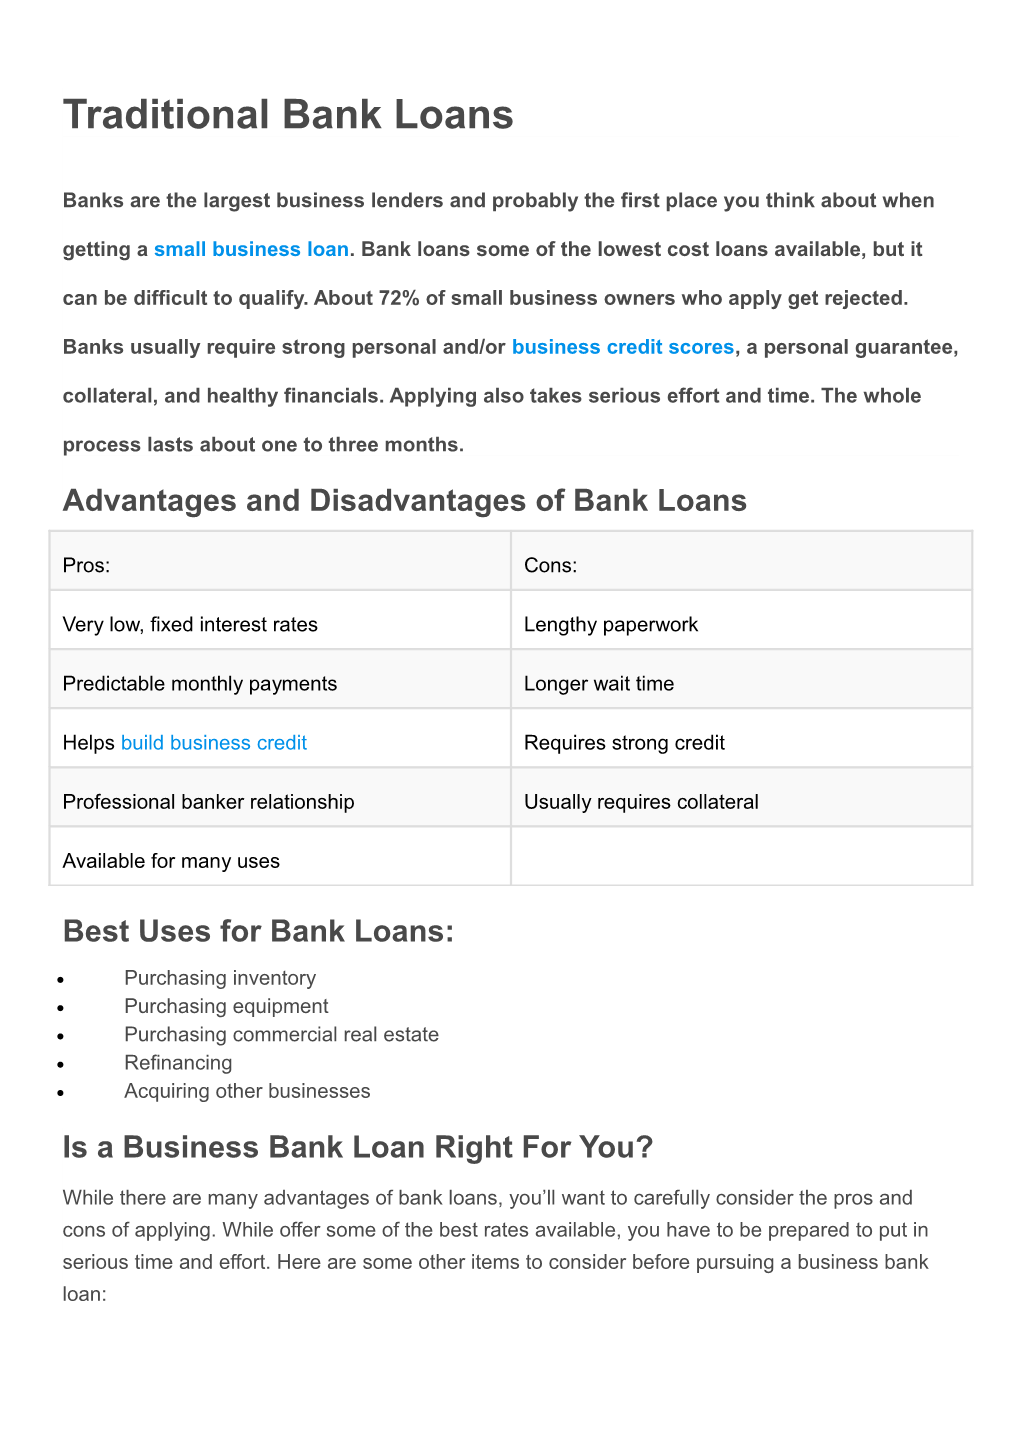 Advantages and Disadvantages of Bank Loans